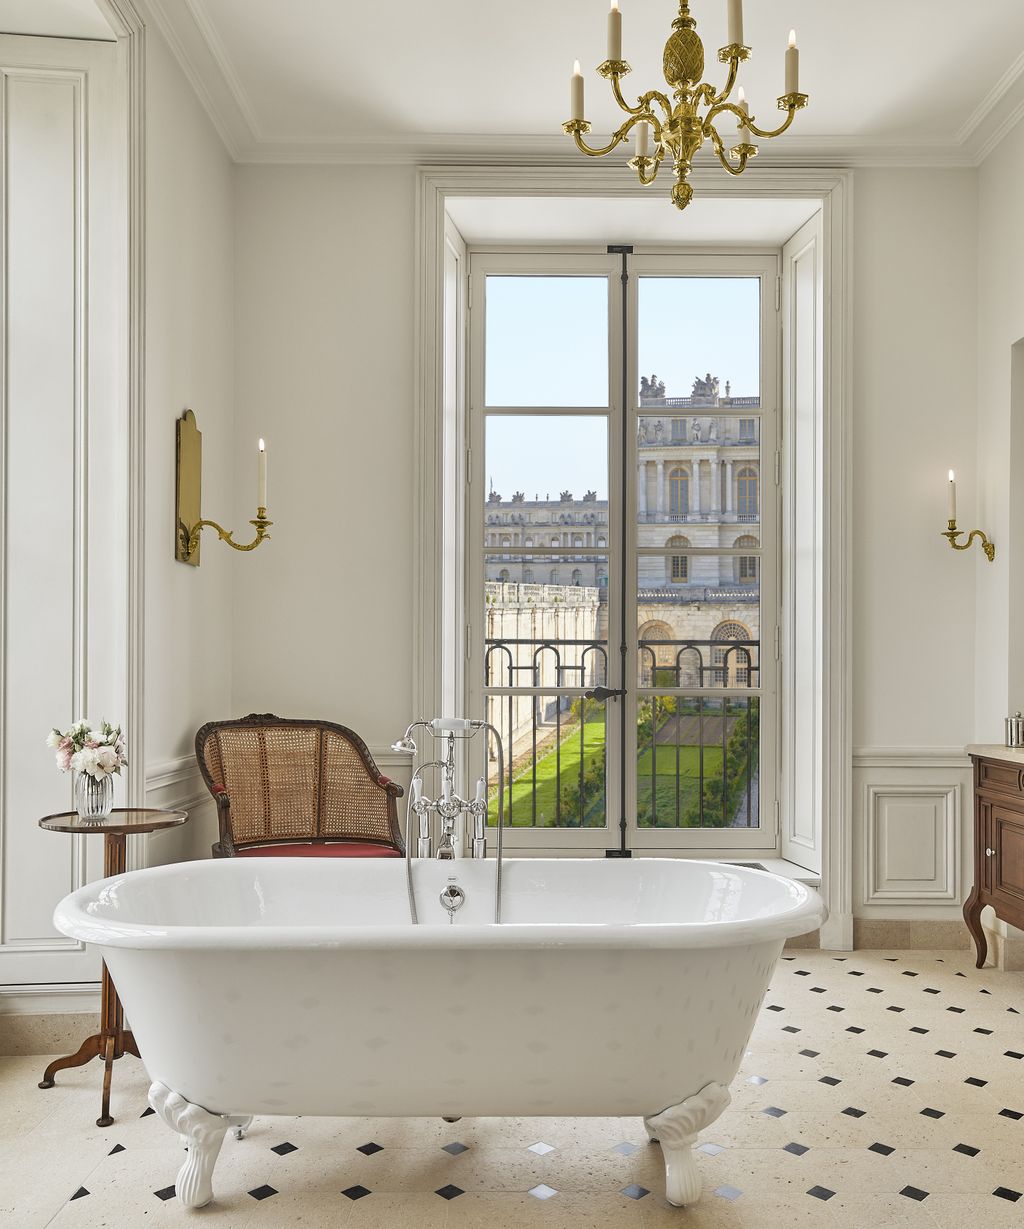 5 style tips to steal from The Palace of Versailles interiors | Homes ...